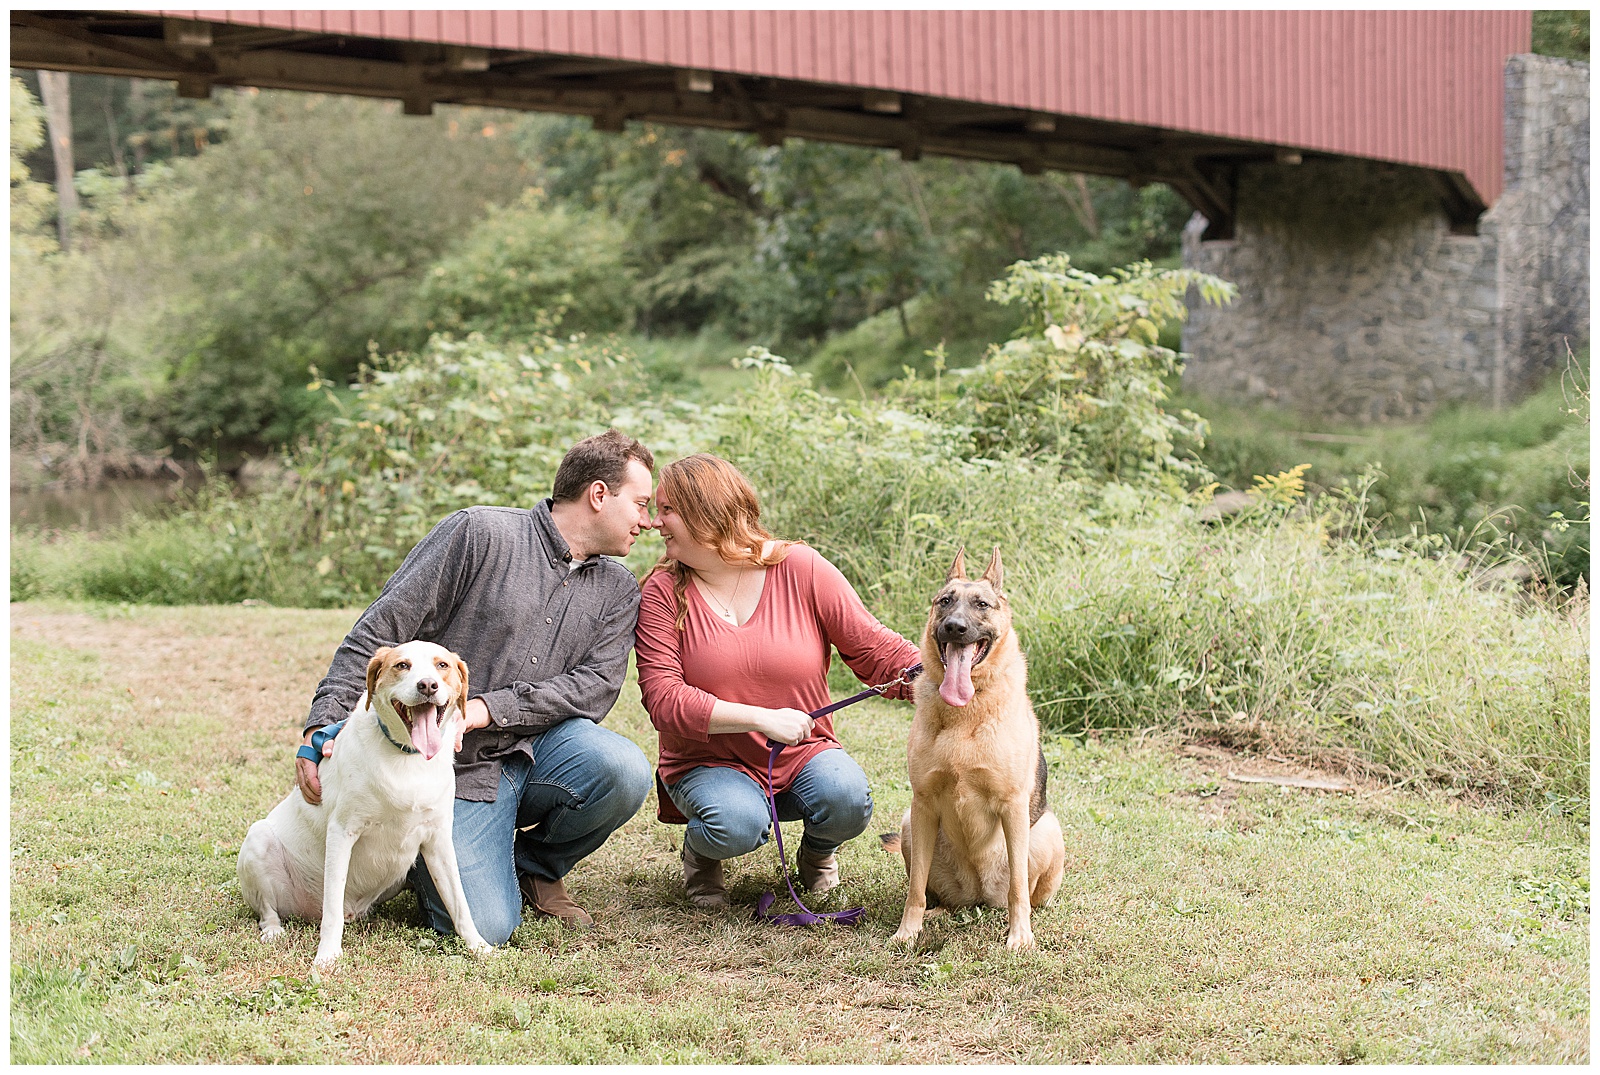 Engagement Session Photos at Lancaster County Park with their dogs